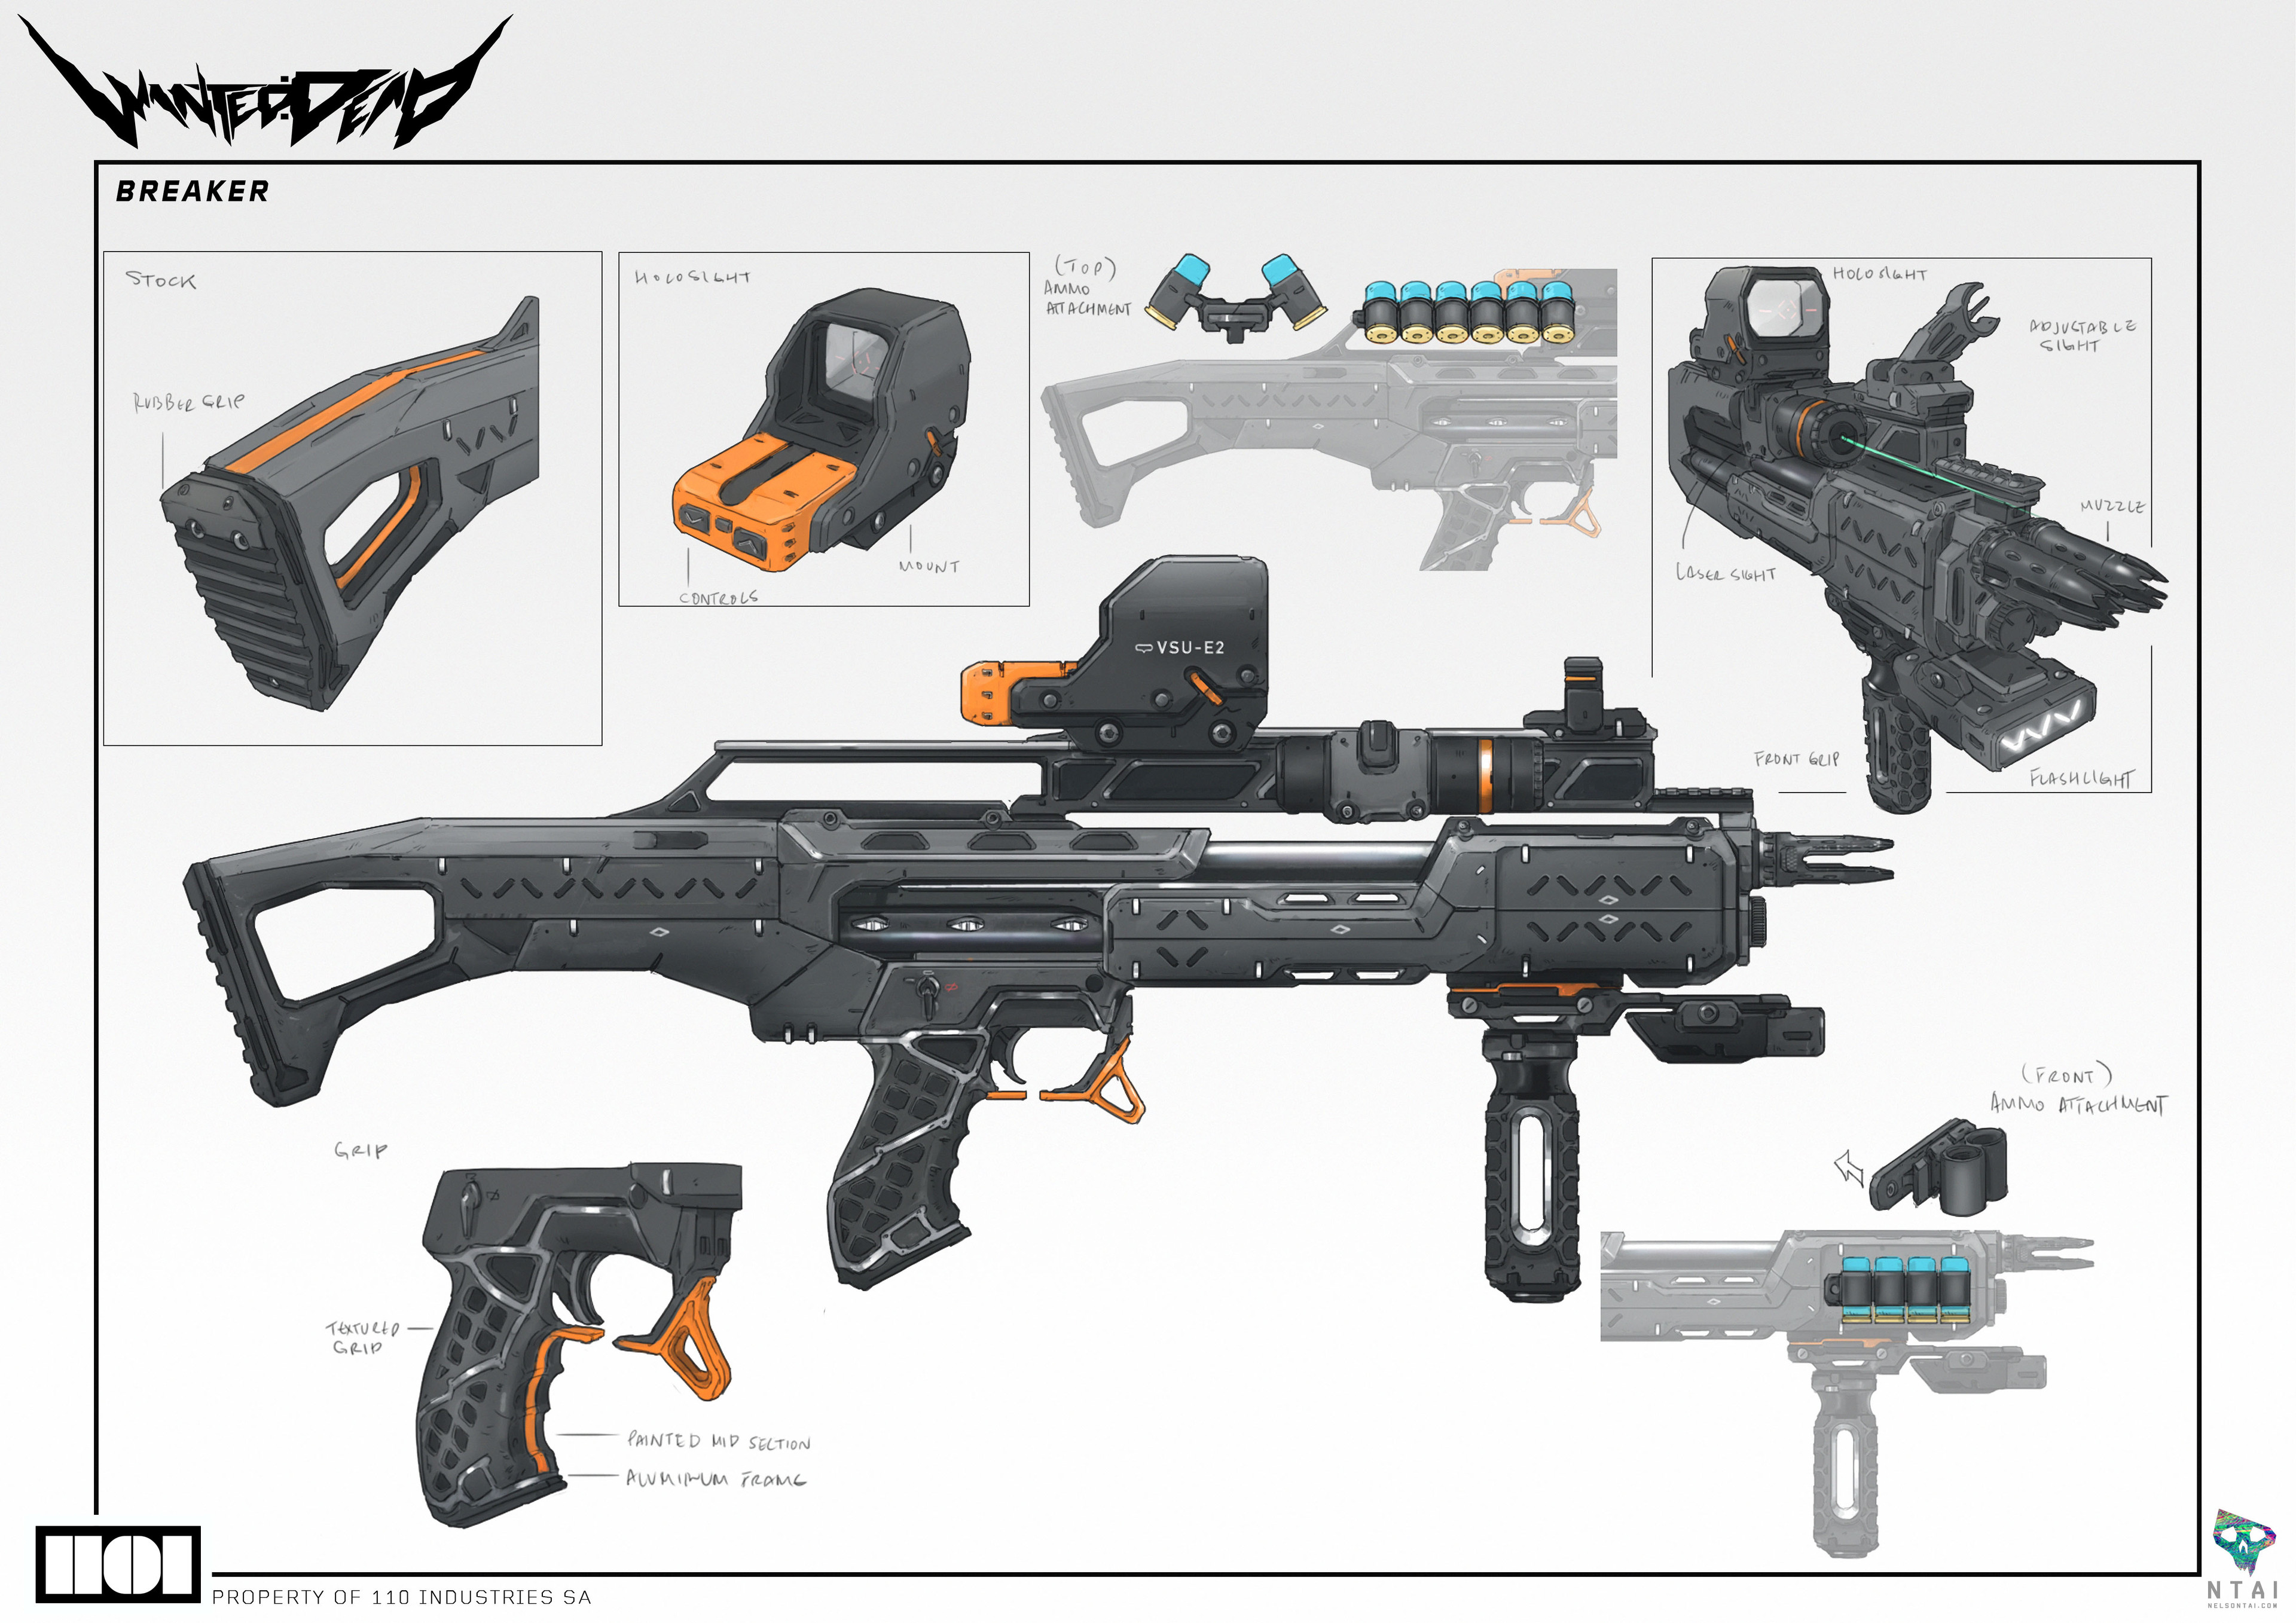 Weapon - Charger. Based on the 433